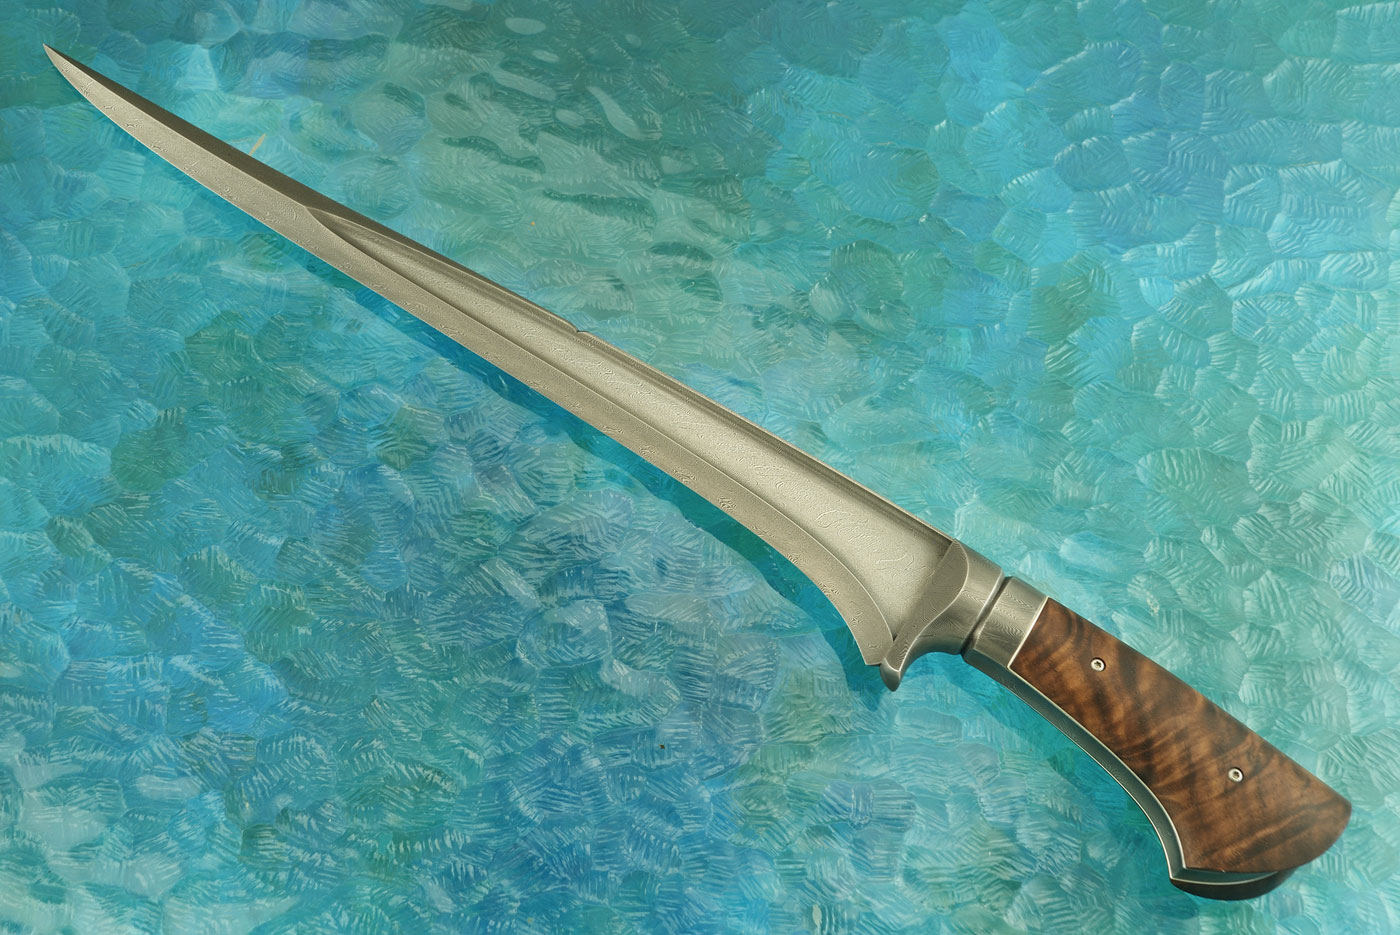 Pesh-Kabz Persian Fighter with Multi-Bar Twist Damascus and Walnut<br><i>Best Fixed Blade</i> and <i>Best in Show</i> - Blade Show 2021